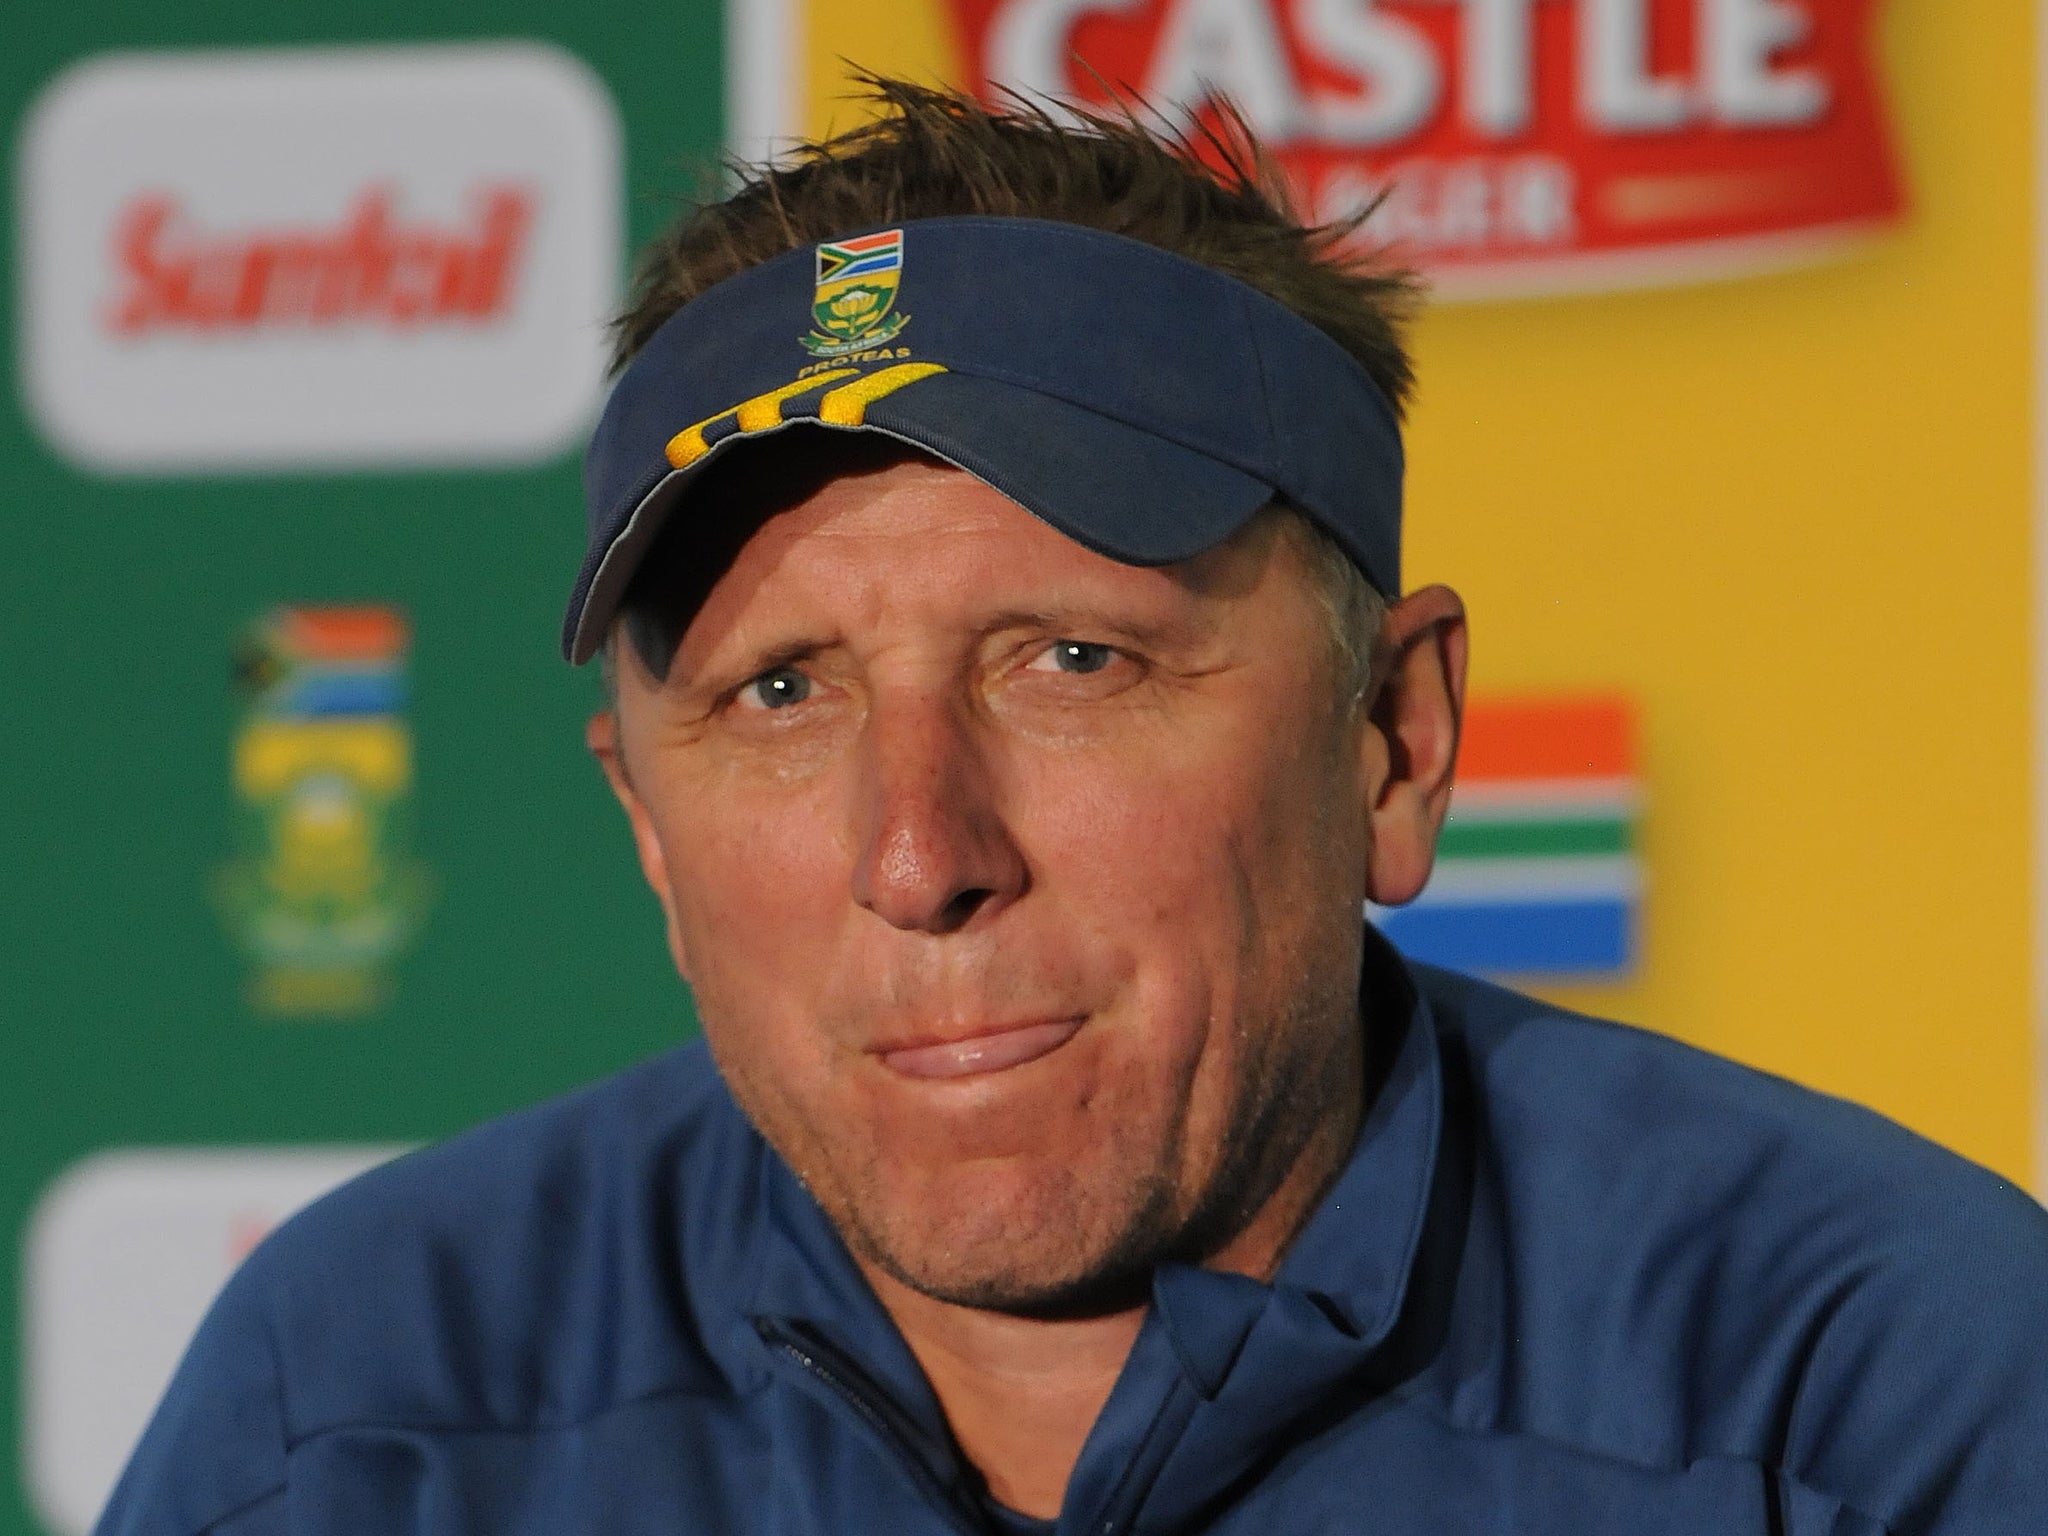 Donald, South Africa’s bowling coach, admits they have a point to prove in the World Cup